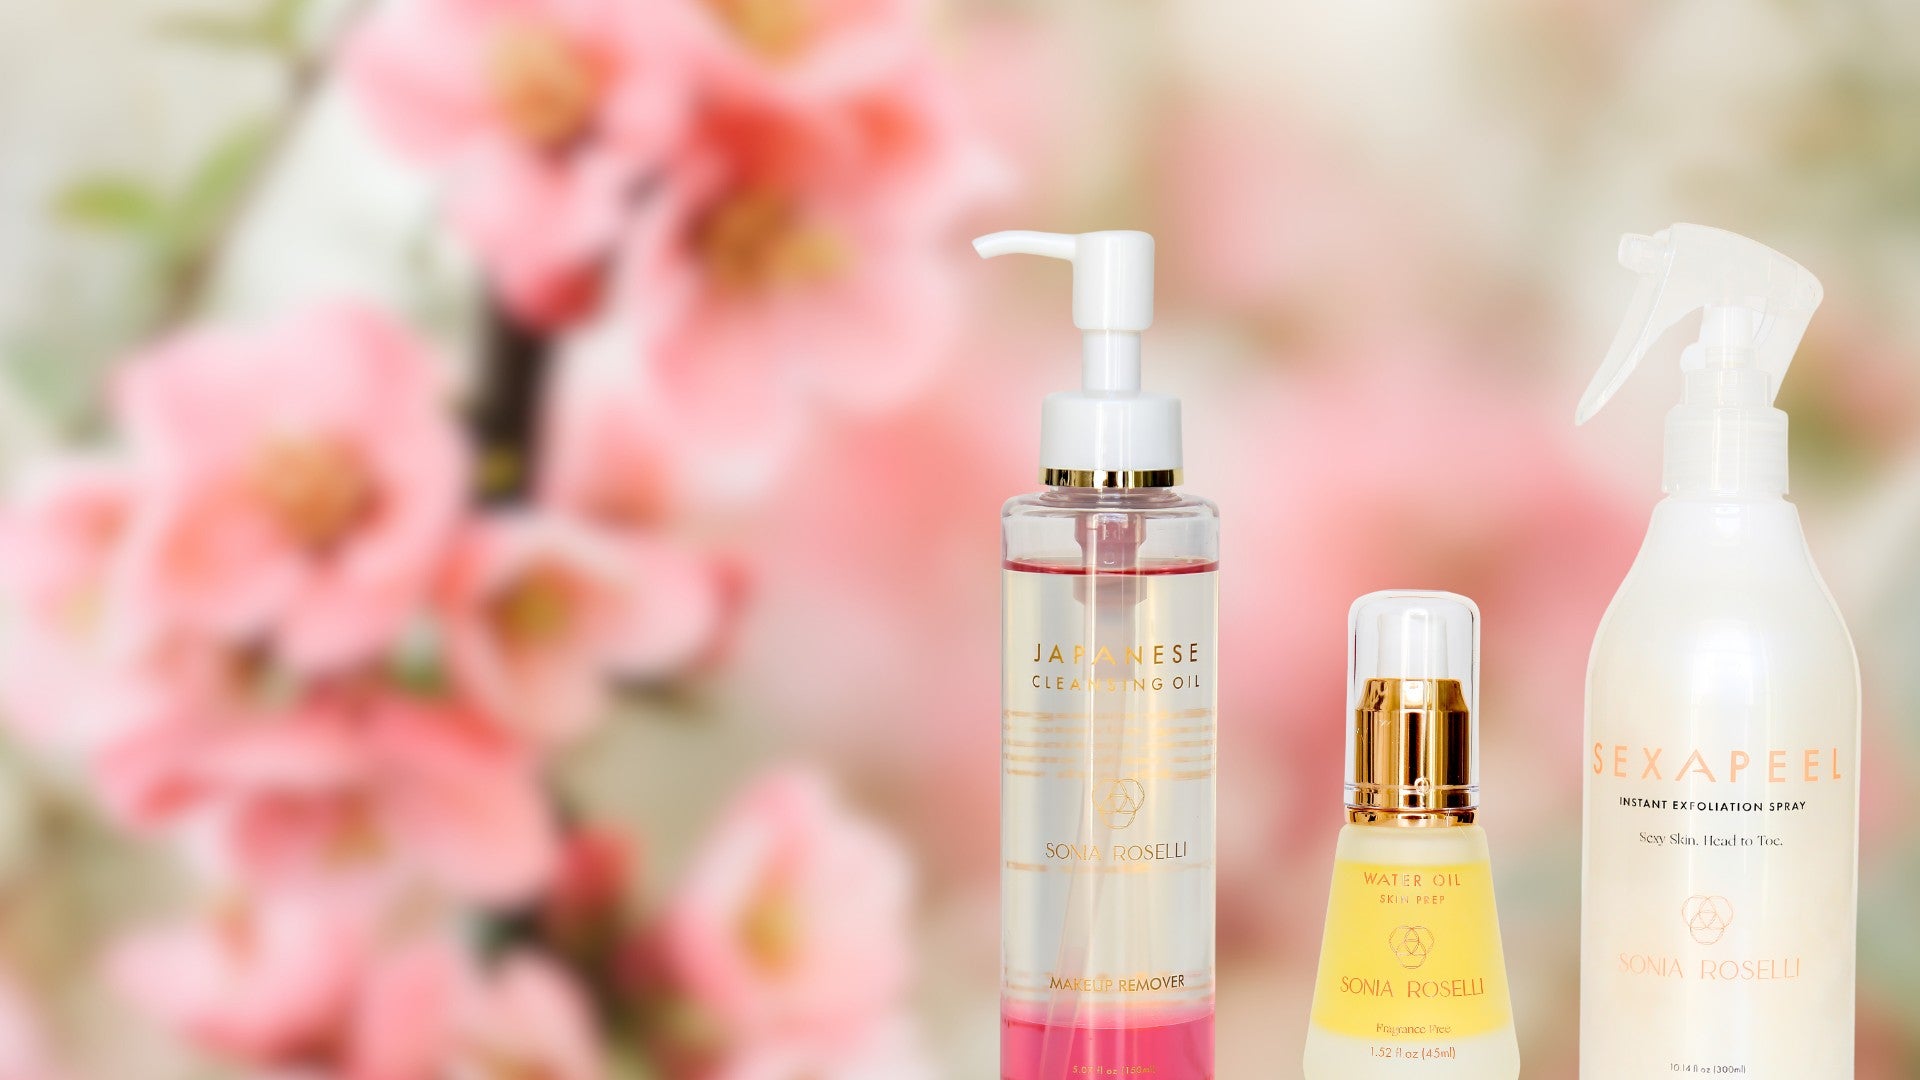 Japanese Cleansing Oil, Water Oil, and Sexapeel in front of a pink orchid background.